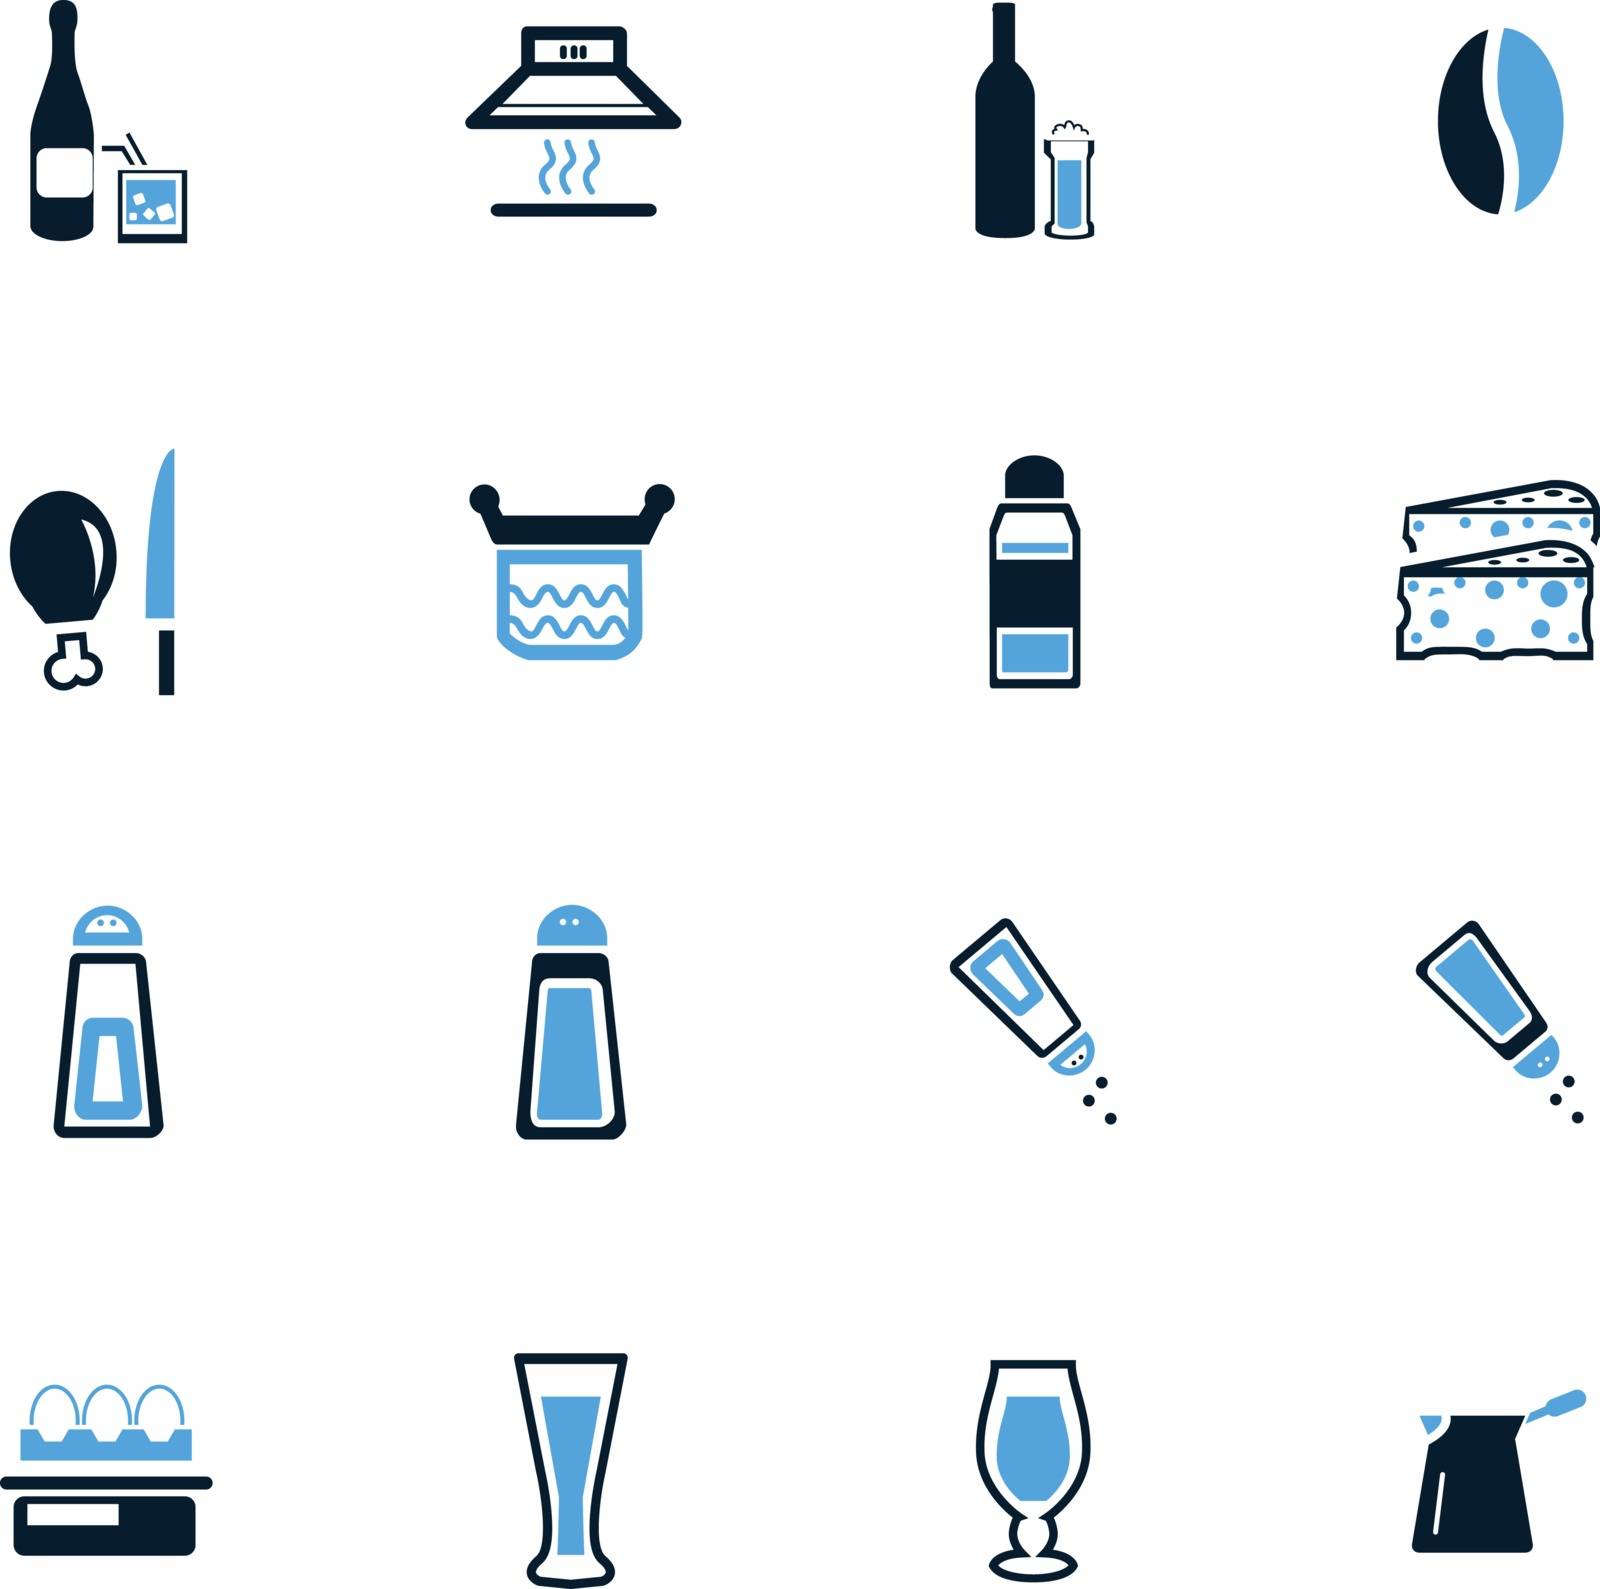 Food and kitchen icons set by ayax